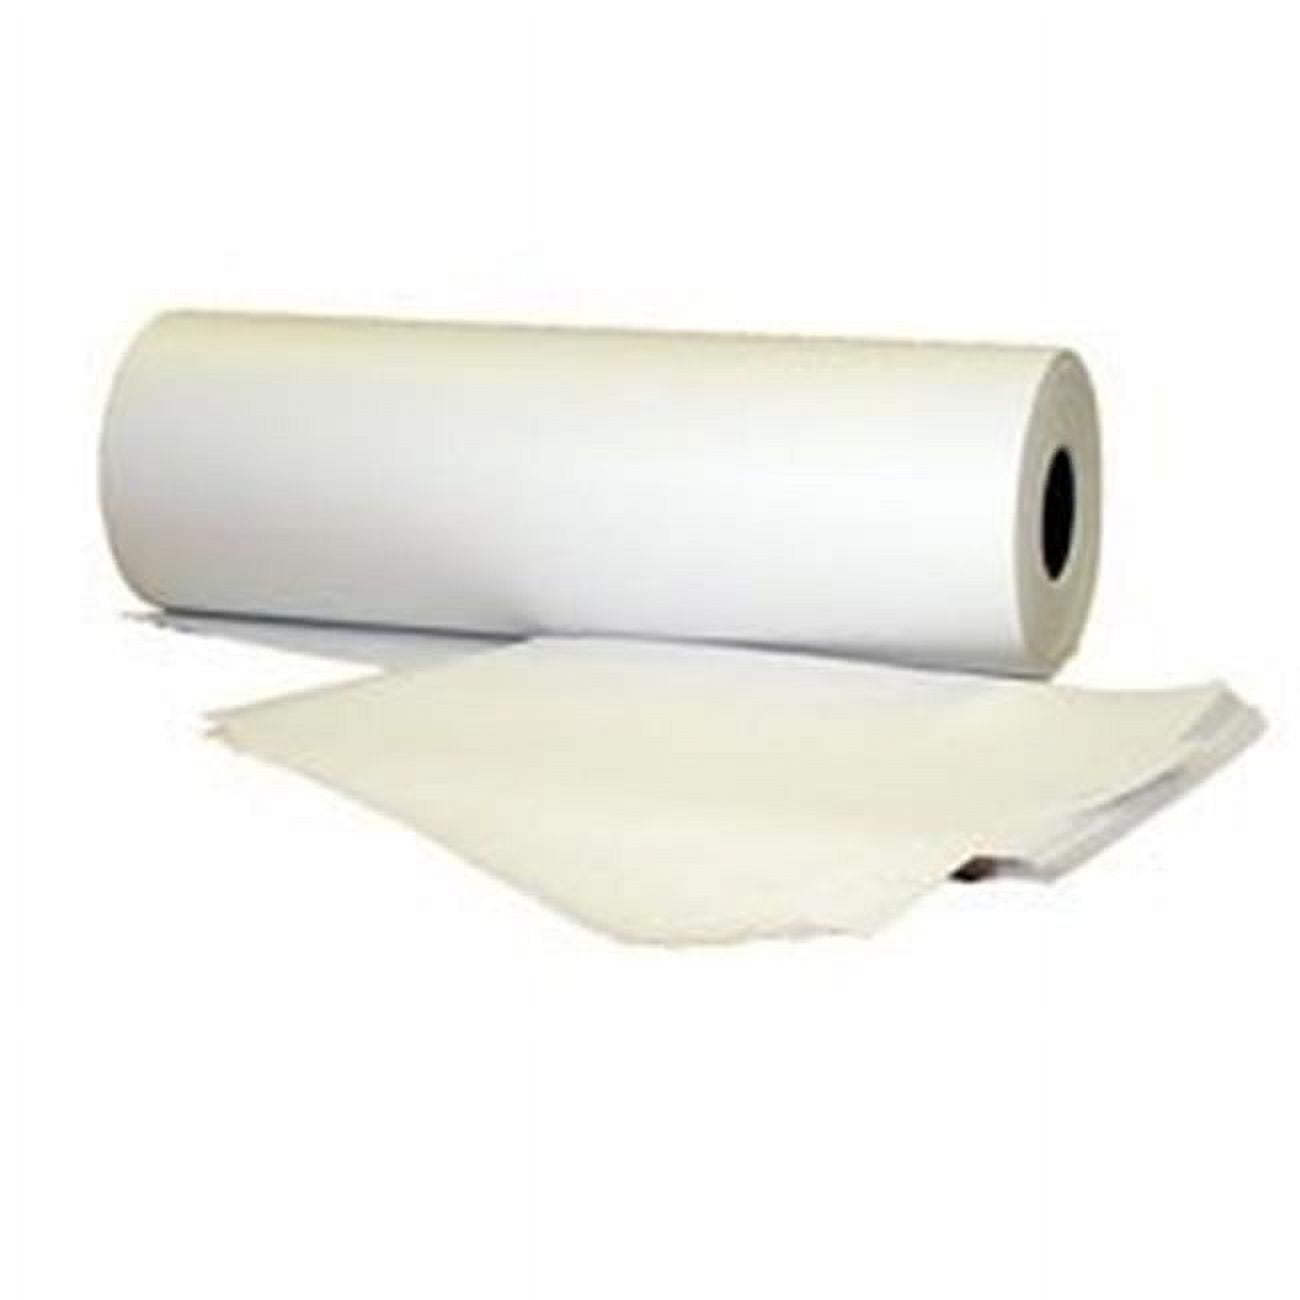 181000mg Cpc 18 In. X 1000 Ft. White Paper Roll